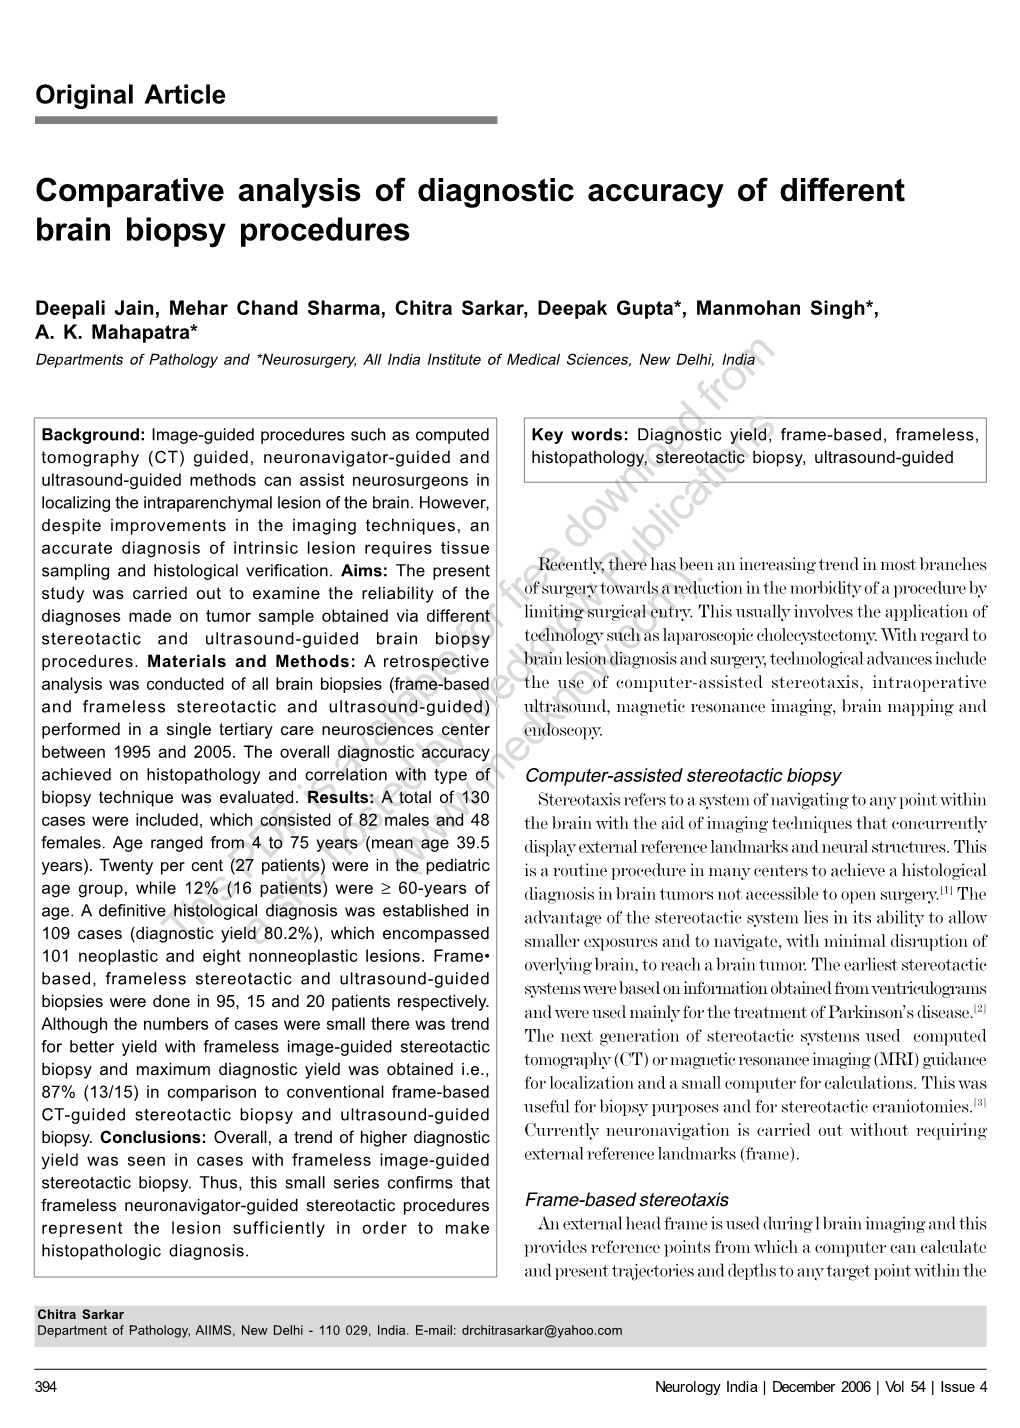 Comparative Analysis of Diagnostic Accuracy of Different Brain Biopsy Procedures